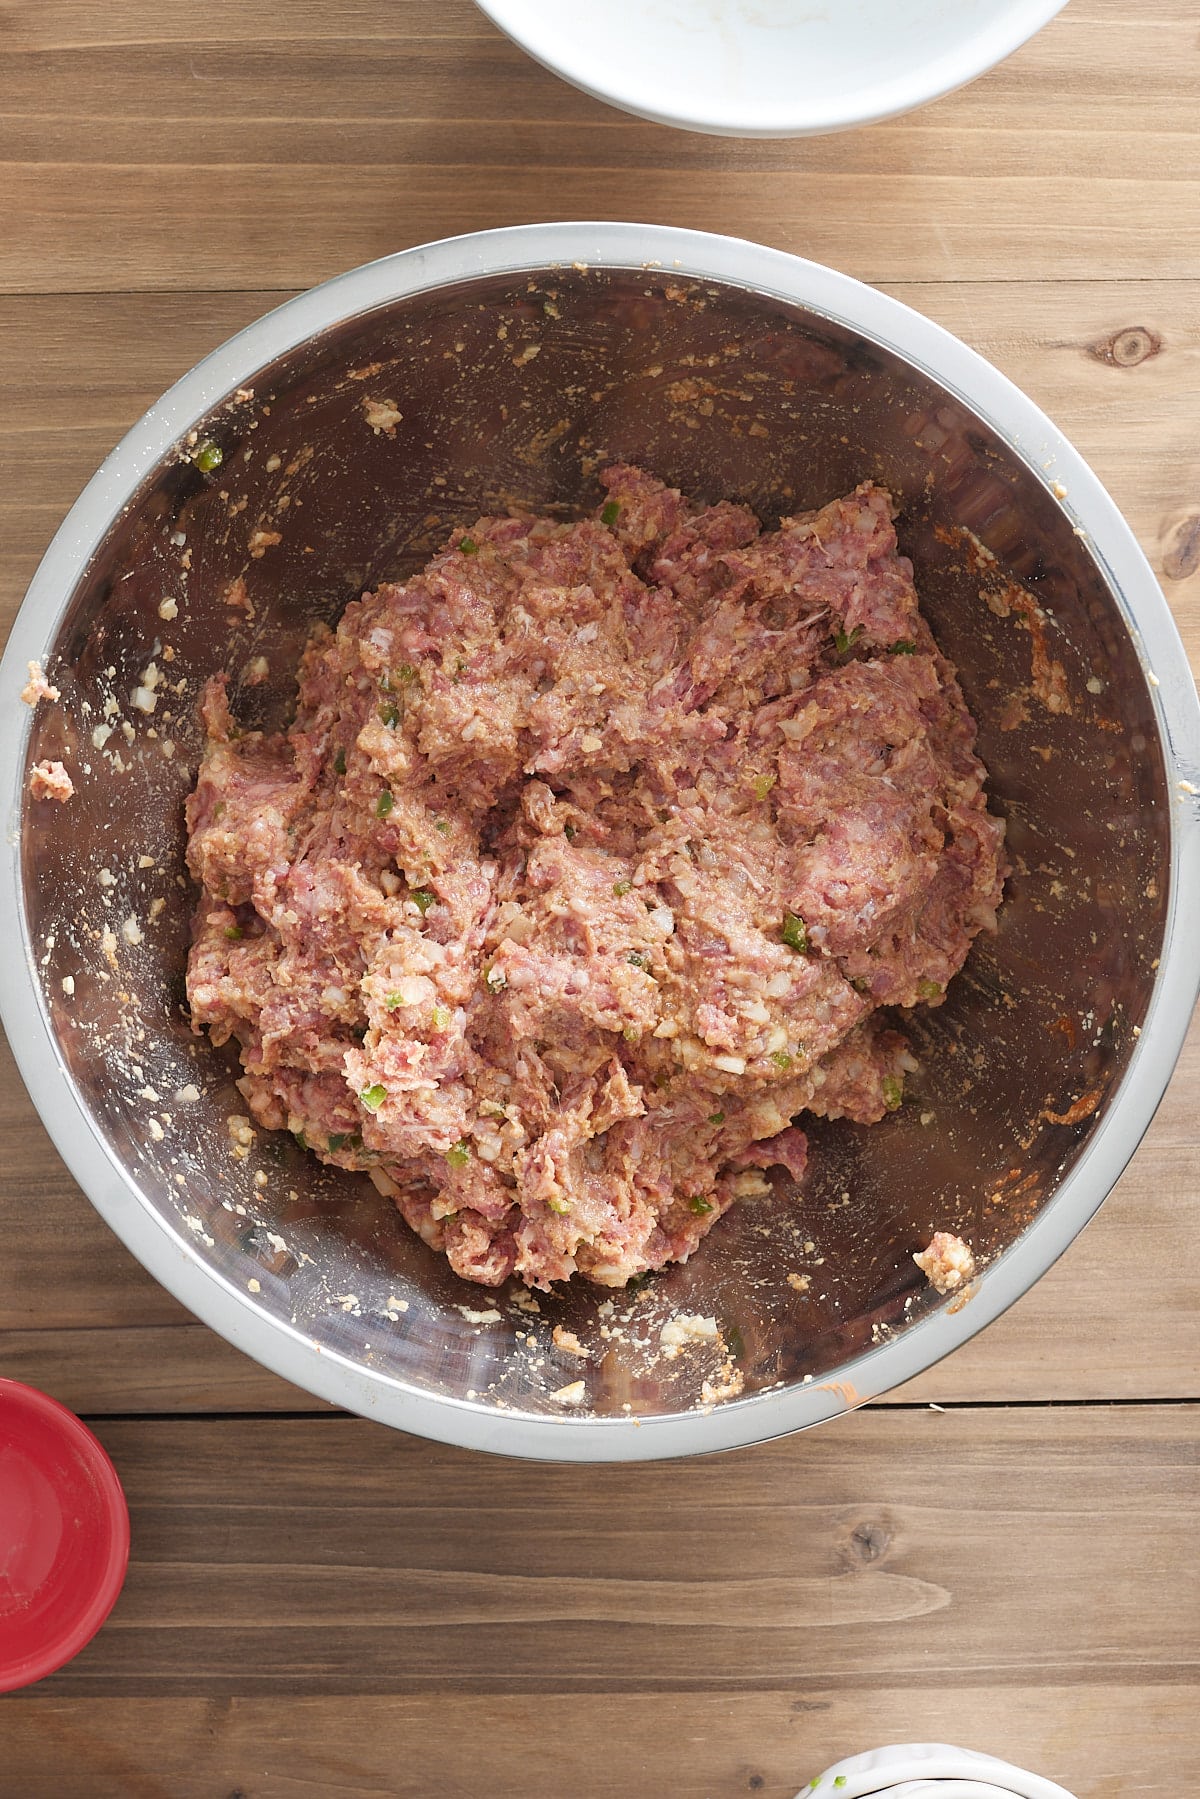 Large silver bowl with raw meatloaf mixture